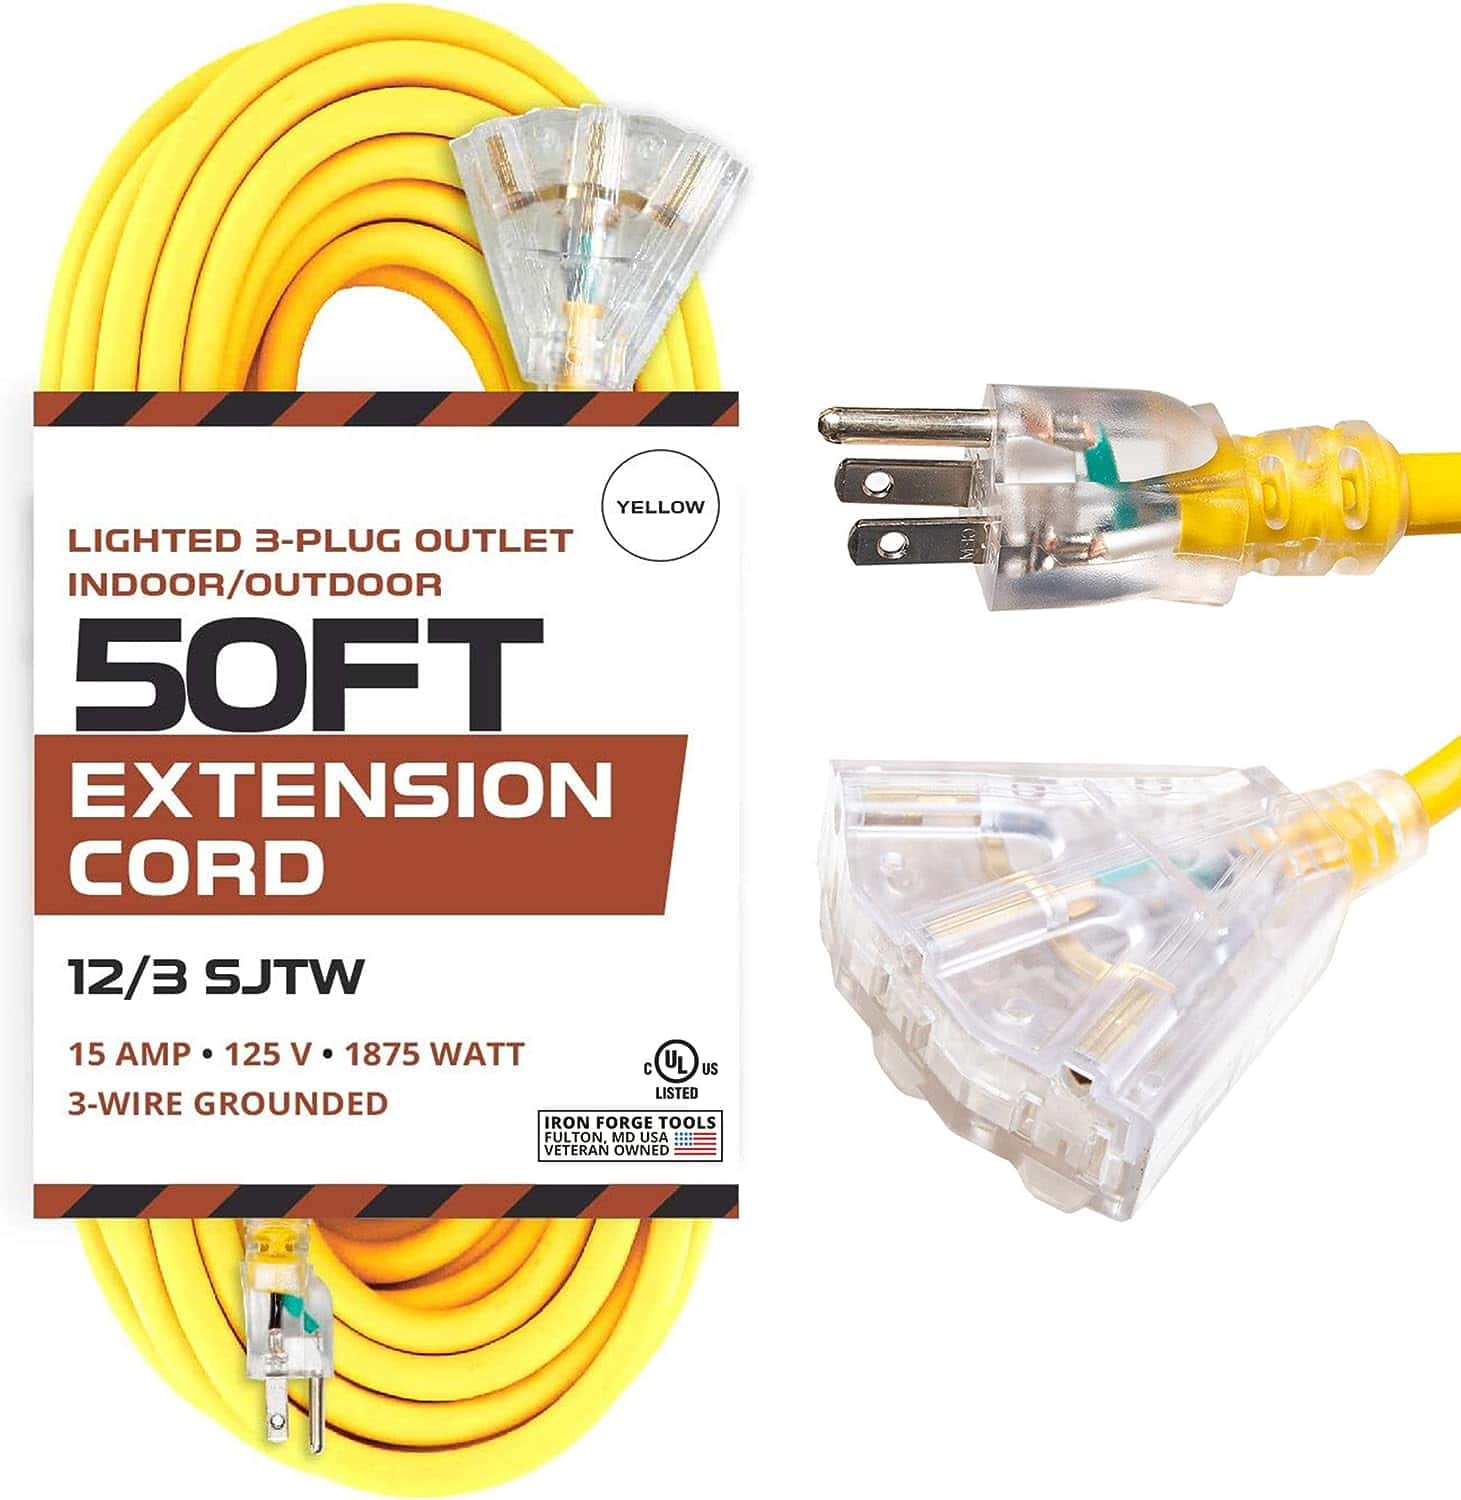 Iron Forge Cable 50 Foot Lighted Outdoor Extension Cord with 3 Electrical Power Outlets – 12 3 SJTW Heavy Duty Yellow Extension Cable with 3 Prong Grounded Plug for Safety 15 AMP 1